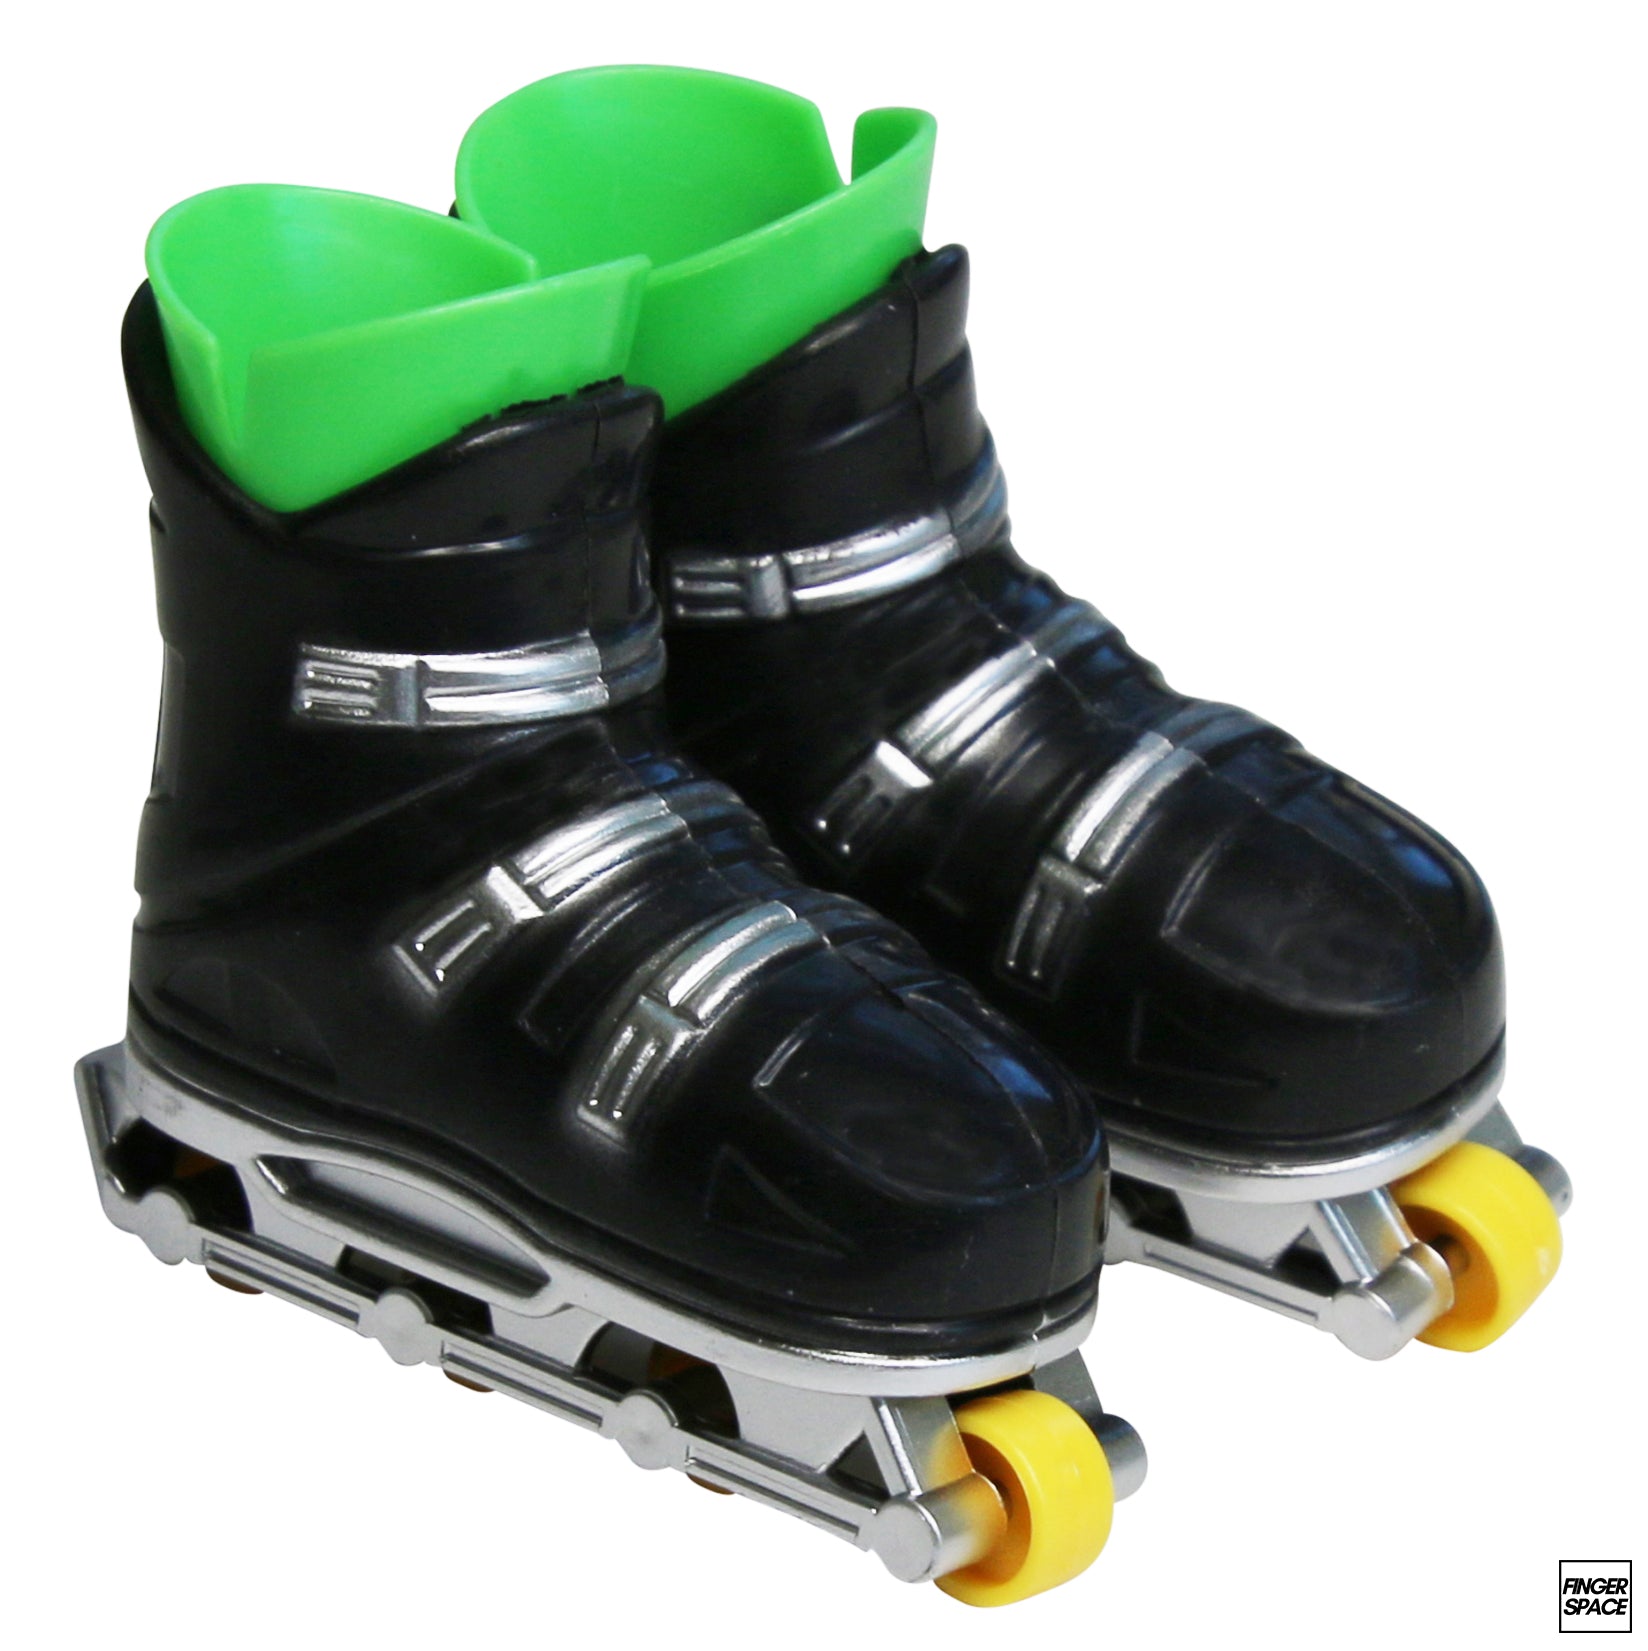 ROLLER DISCO STICKERS - The Toy Box